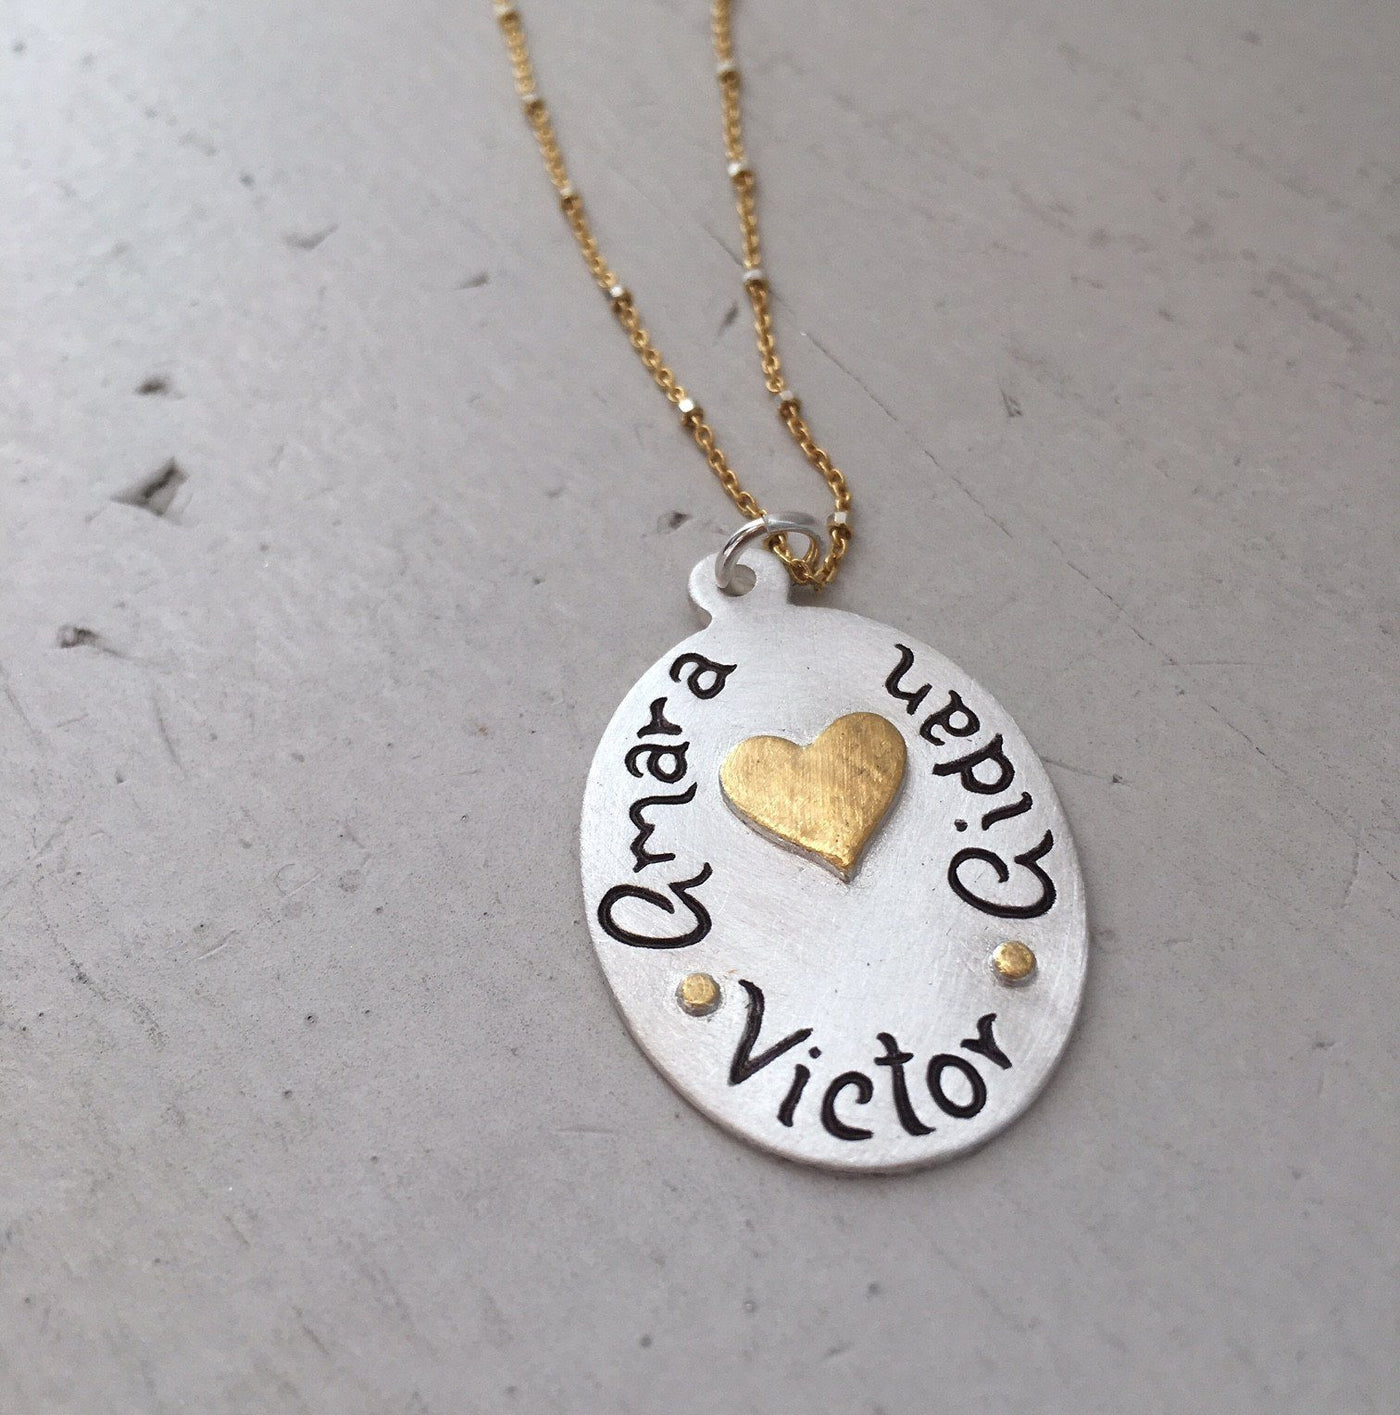 J'Adore Necklace - IsabelleGraceJewelry